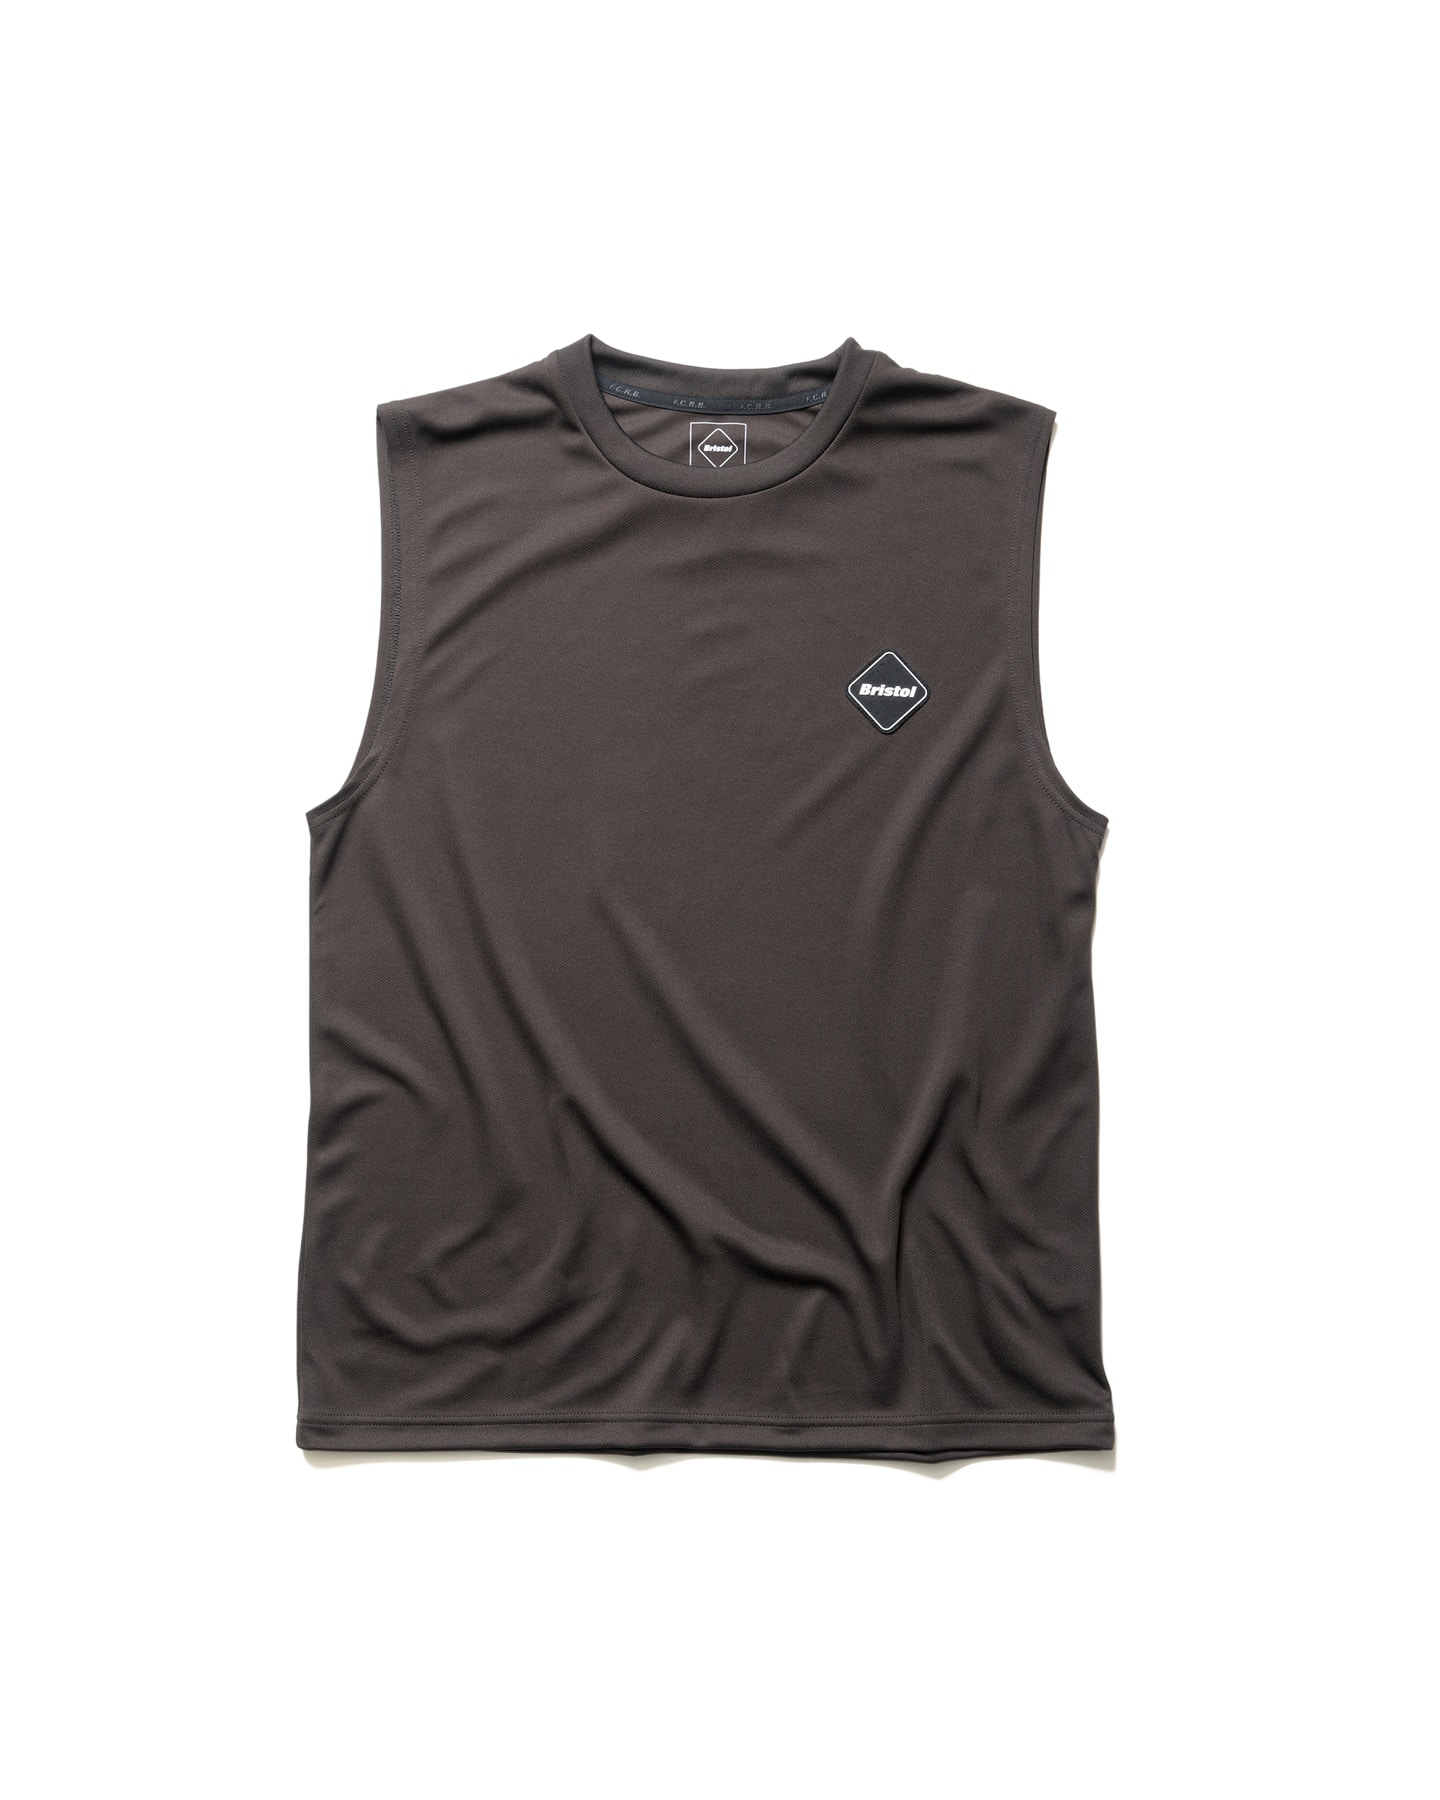 SOPH. | NO SLEEVE TRAINING TOP(S BROWN):